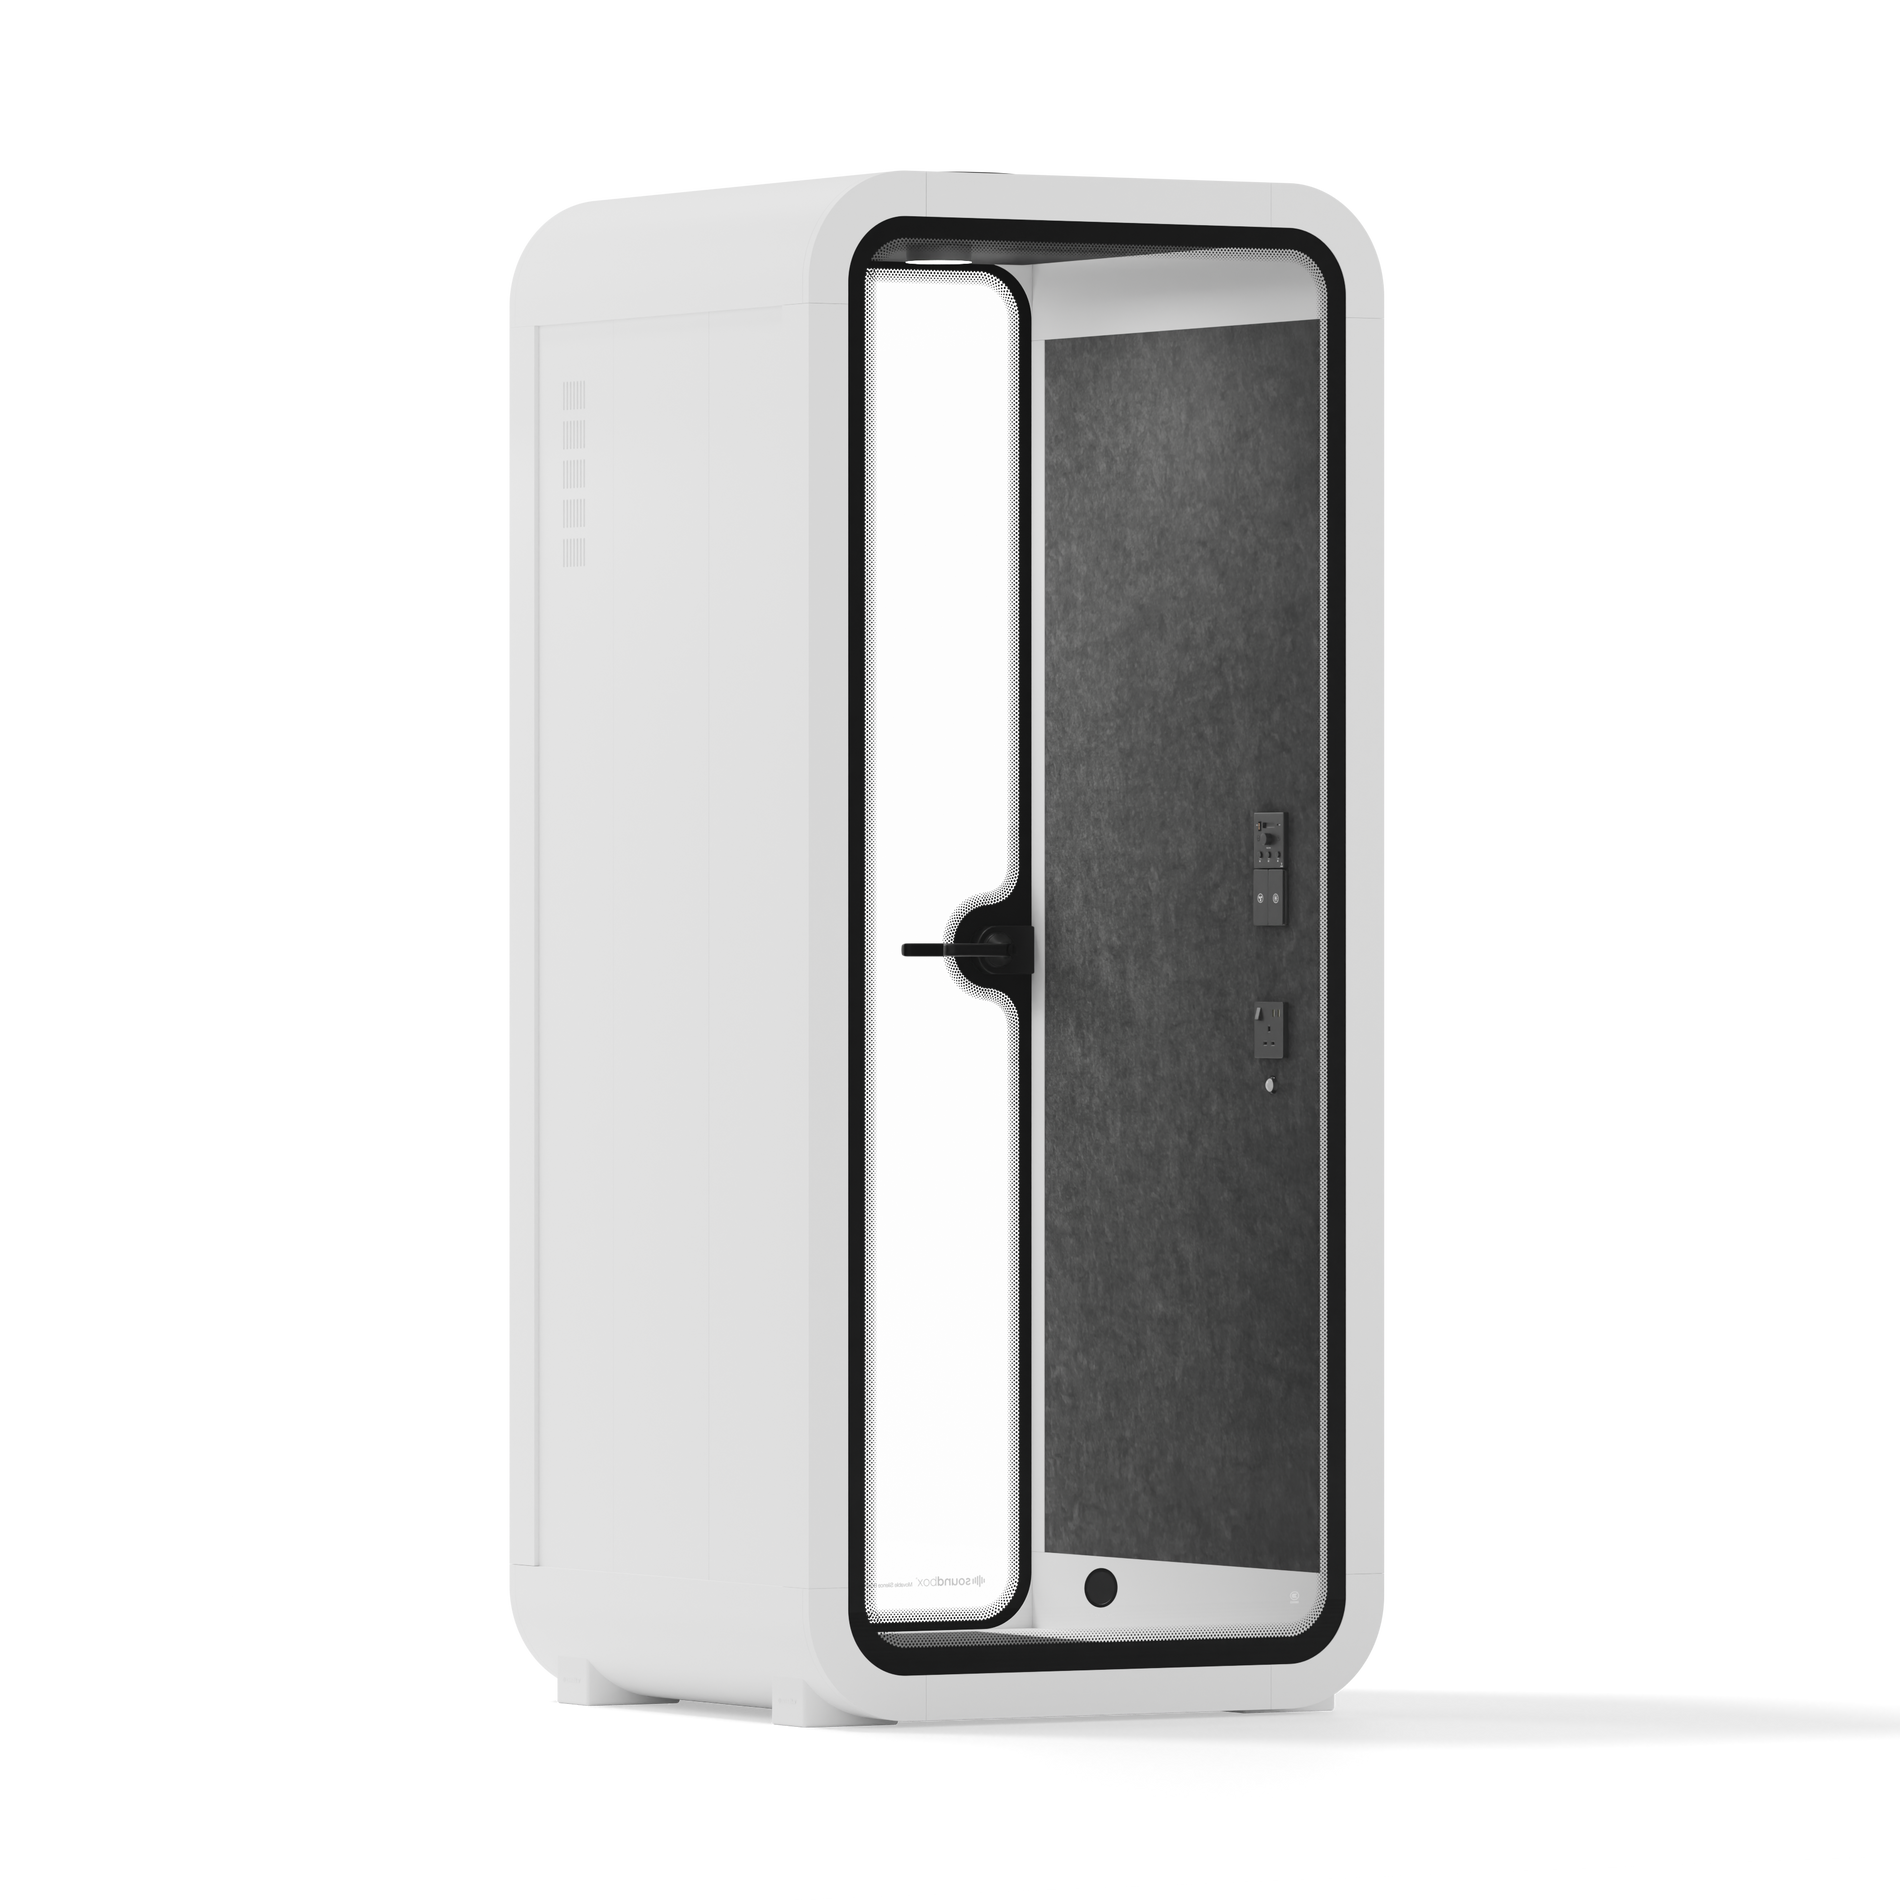 Quell Acoustic Phone BoothWhite / Dark Grey / No Furniture